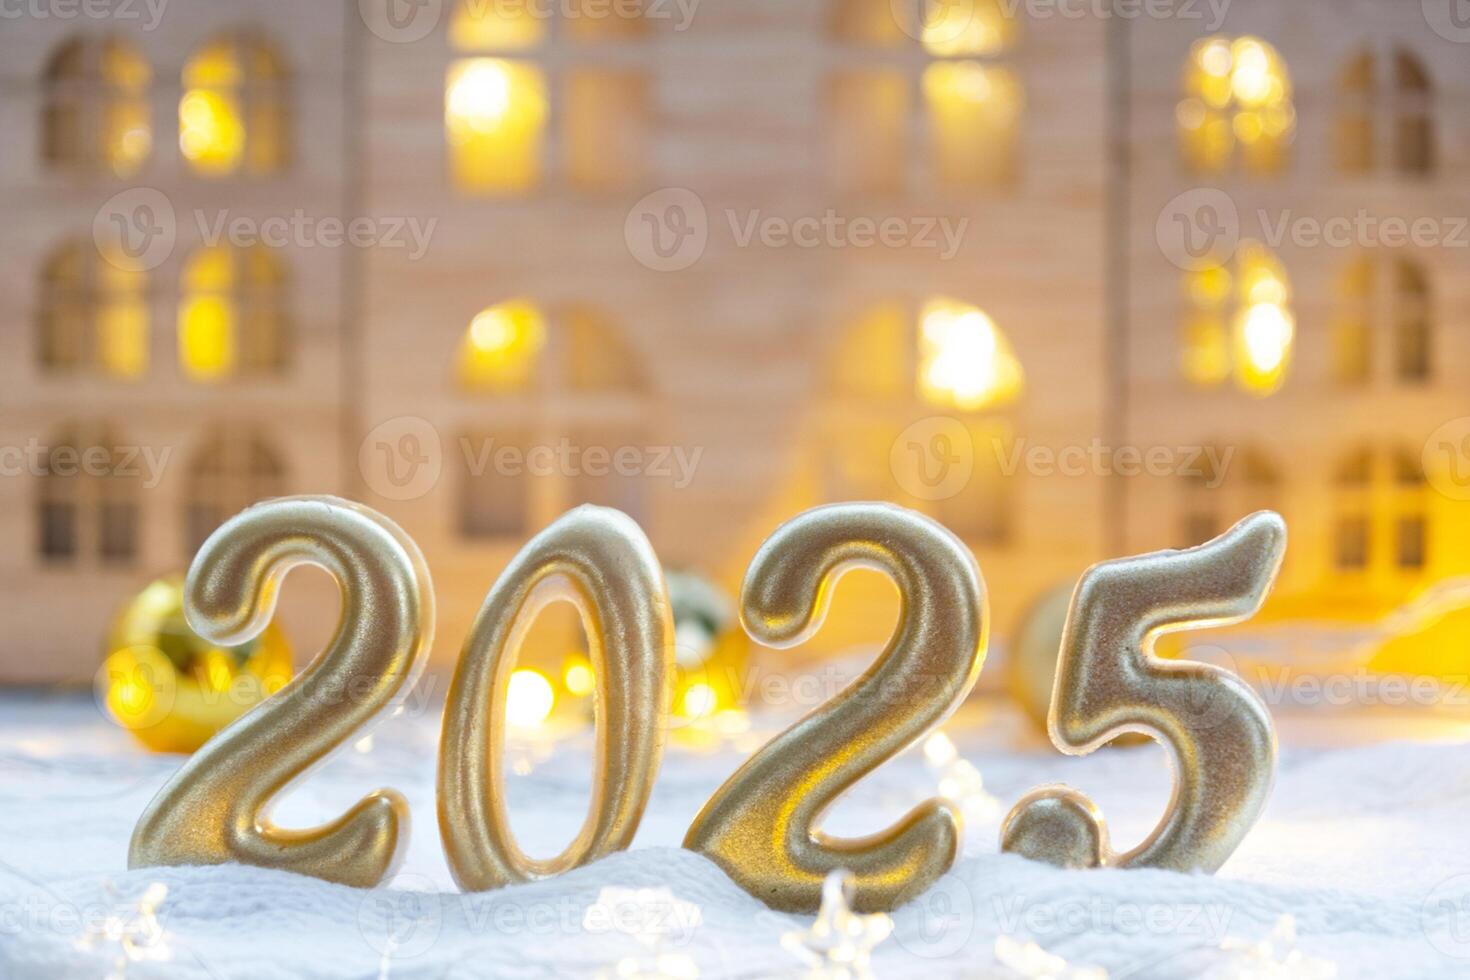 Golden figures number 2025 against the background of cozy windows of a house with warm light with festive decor of stars,snow and garlands. Greeting card, Happy New Year, cozy home photo